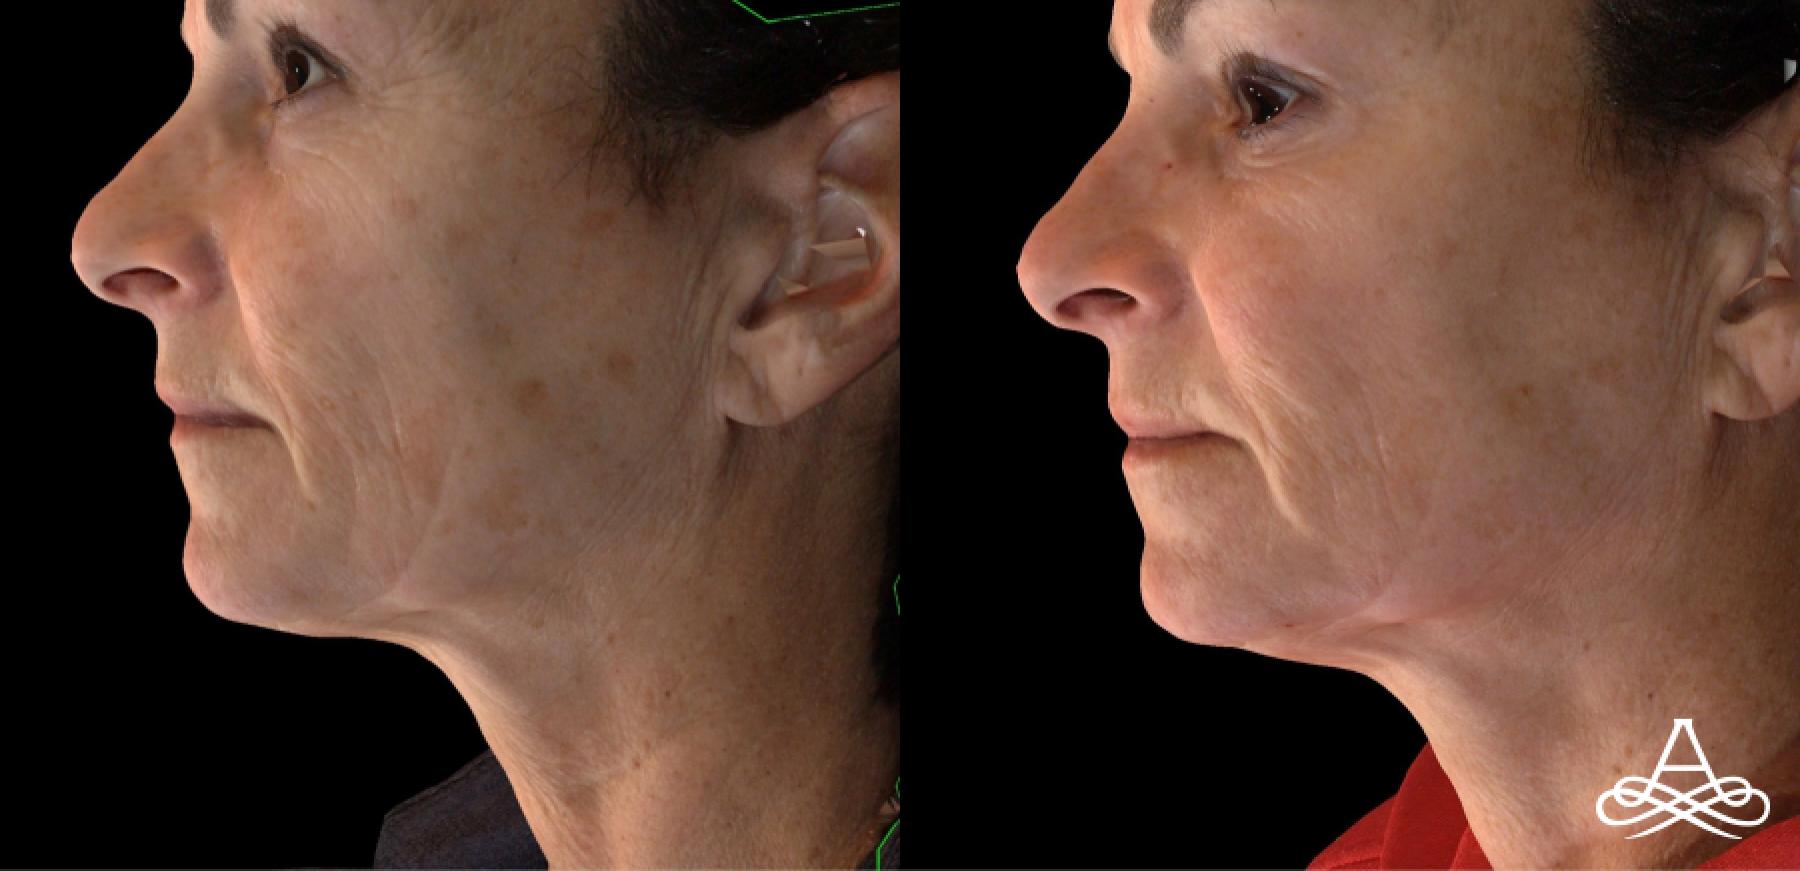 CO2 Laser Resurfacing: Patient 2 - Before and After  